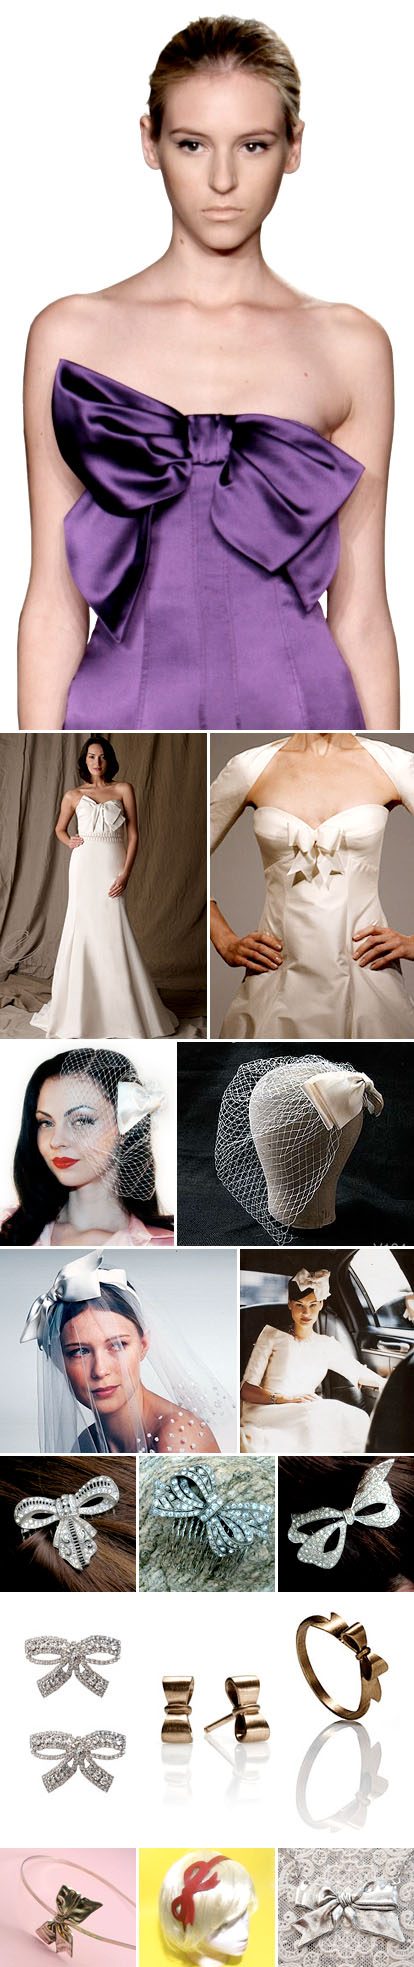 Bow and ribbon accented wedding dresses, veils, jewelry and accessories